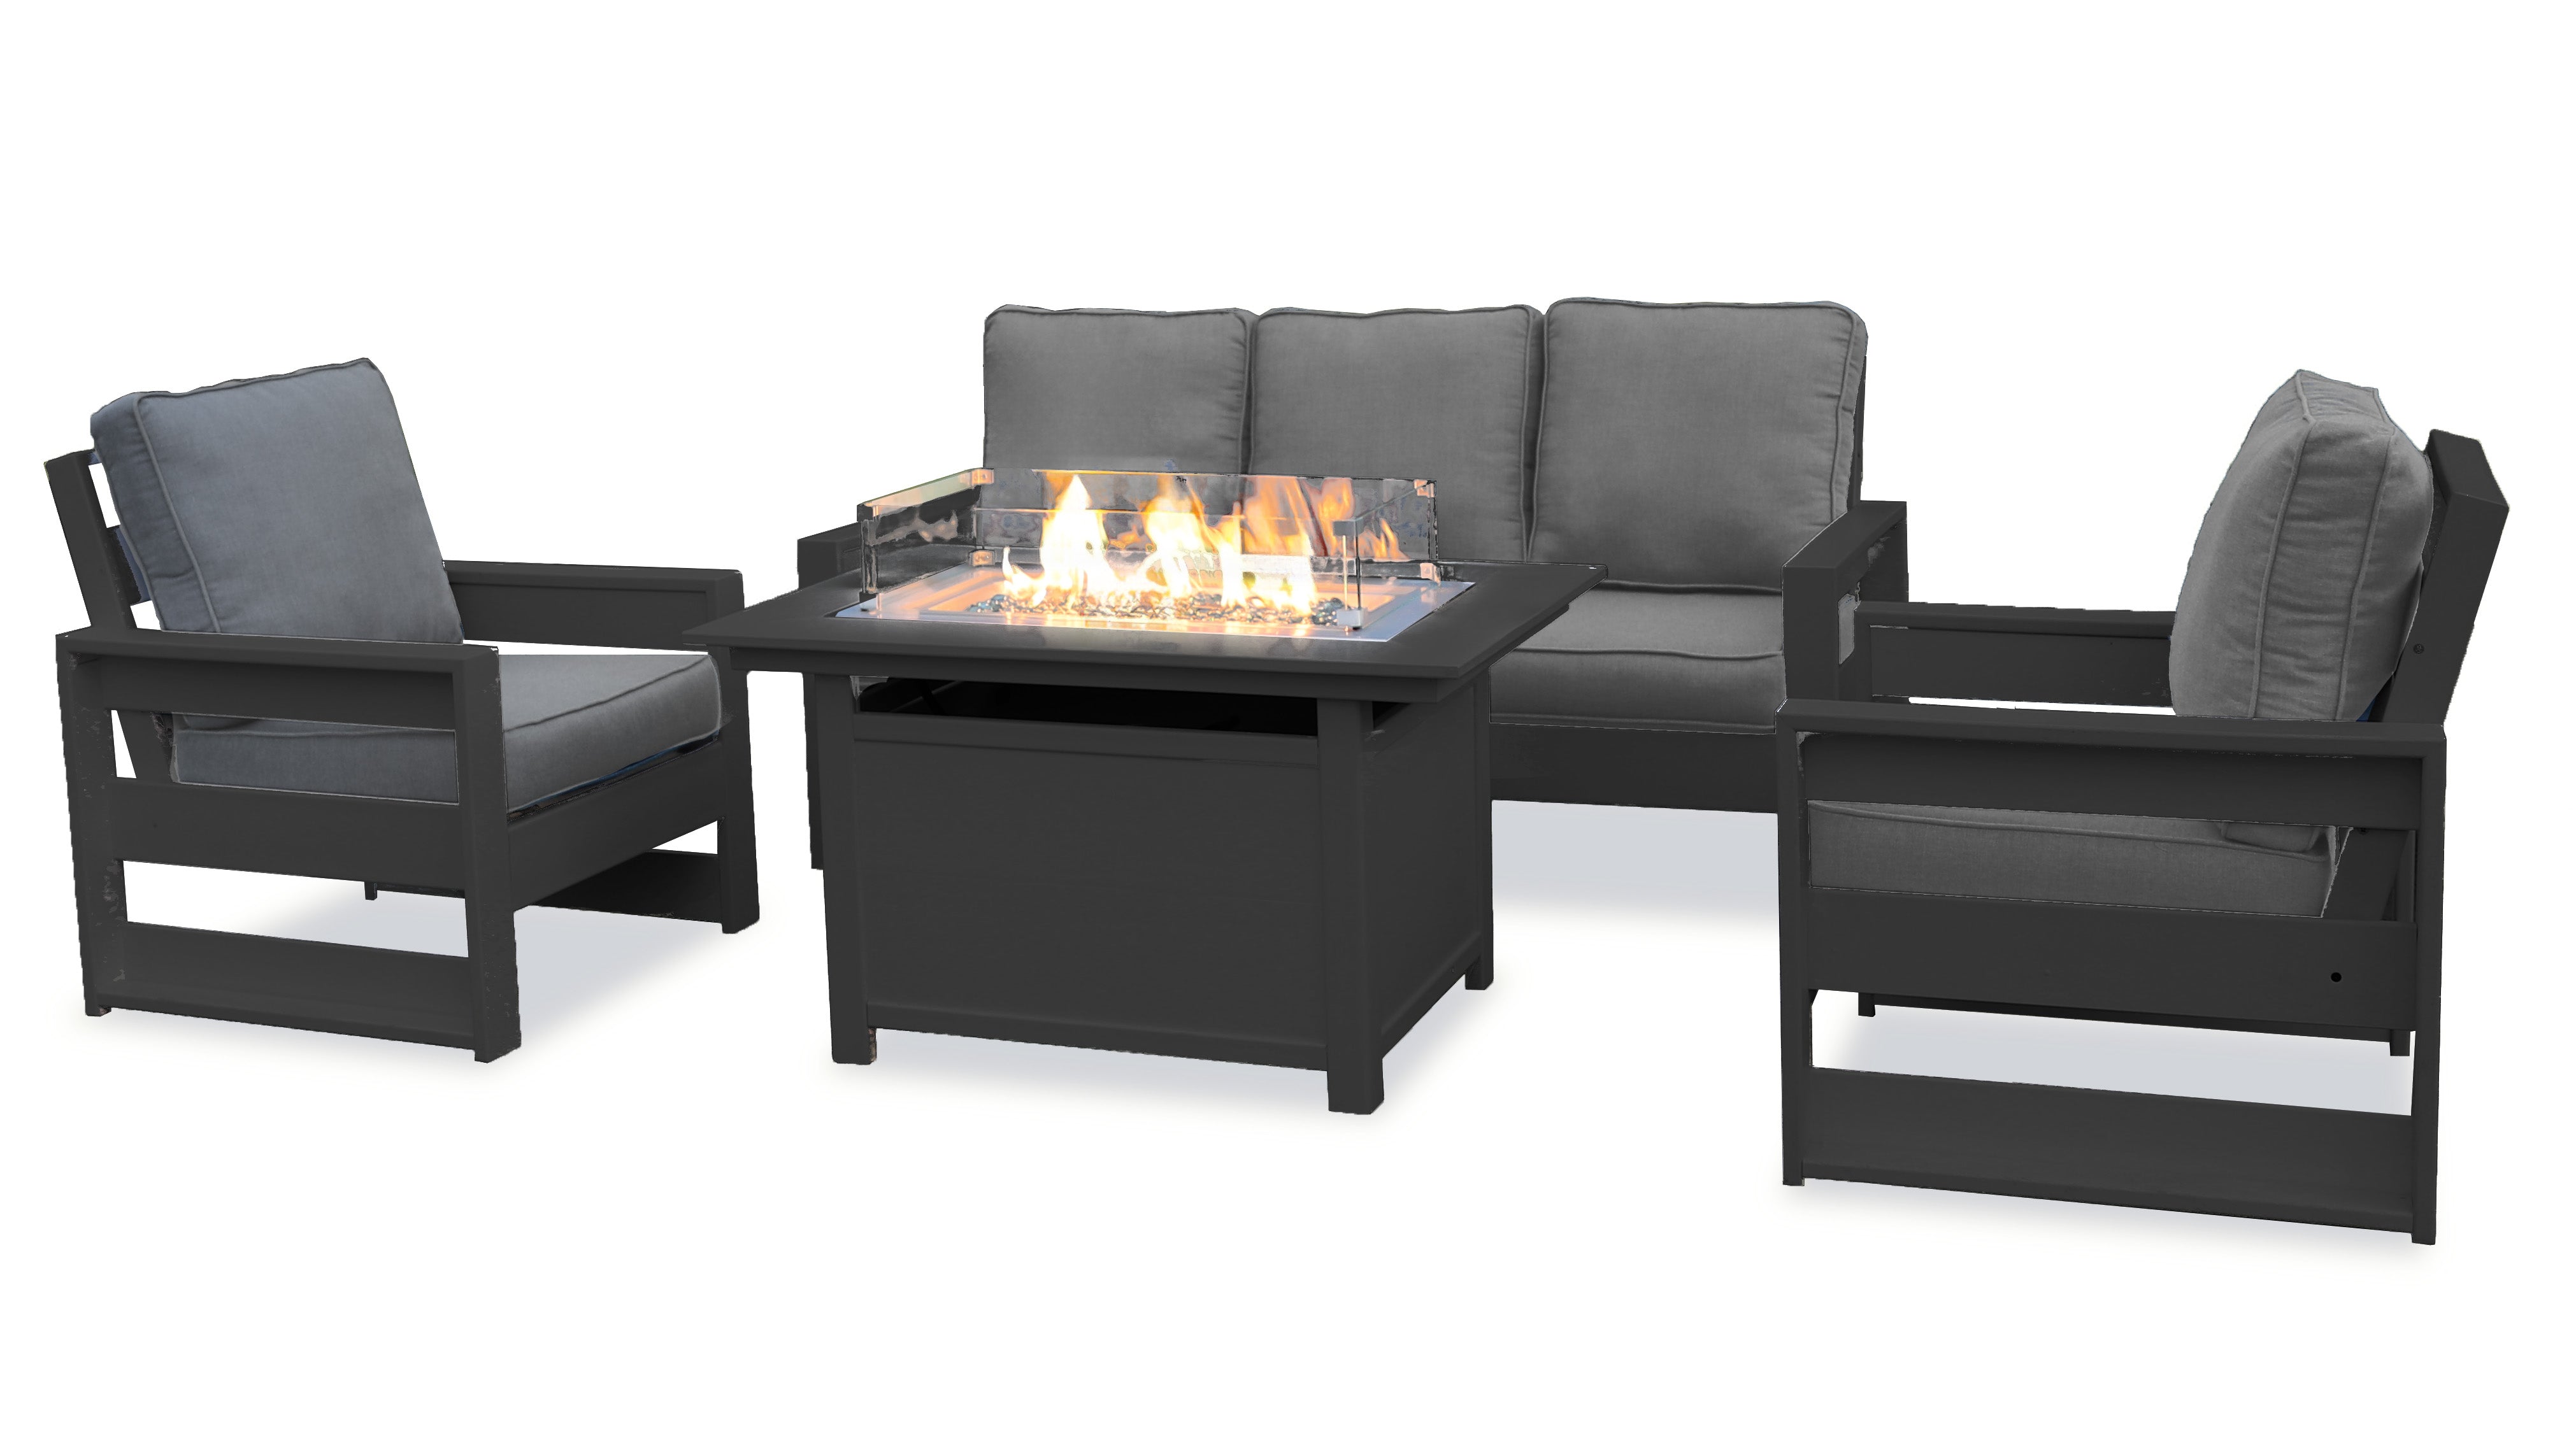 LuXeo Cortina 25"(H) x 45"(W) Rectangle Fire Pit Table with Pacifica Sofa Set, 4-Piece